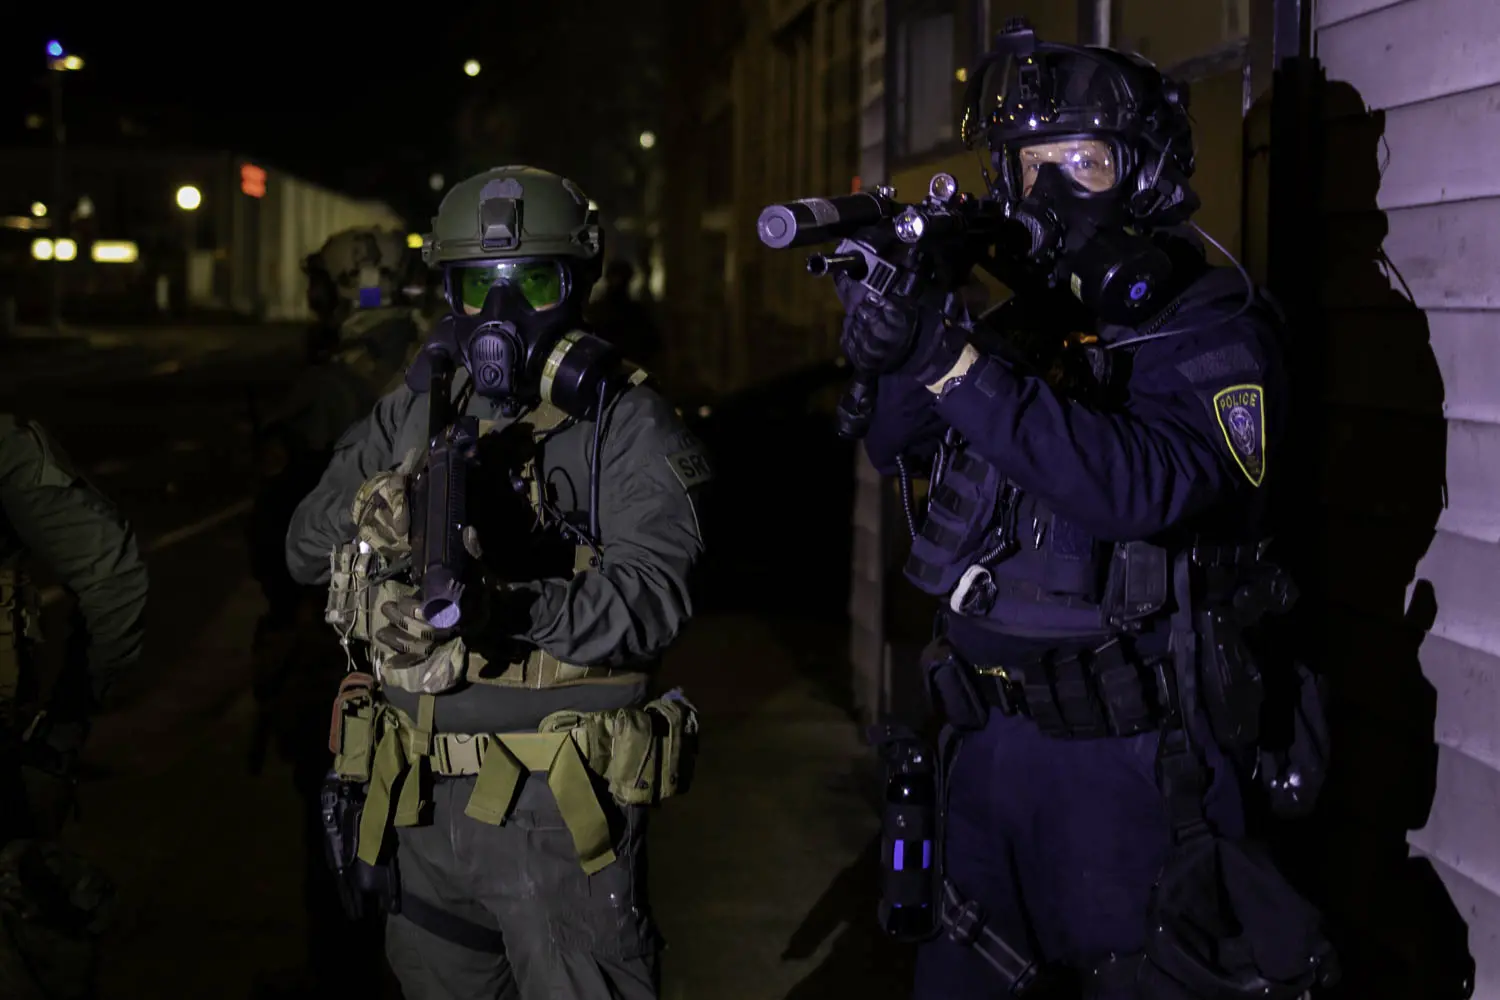 Federal Department of Homeland Security officers point "less-lethal" munitions weapons at a group of protesters demonstrating near the Immigration and Customs Enforcement building on the night of January 20, 2021.